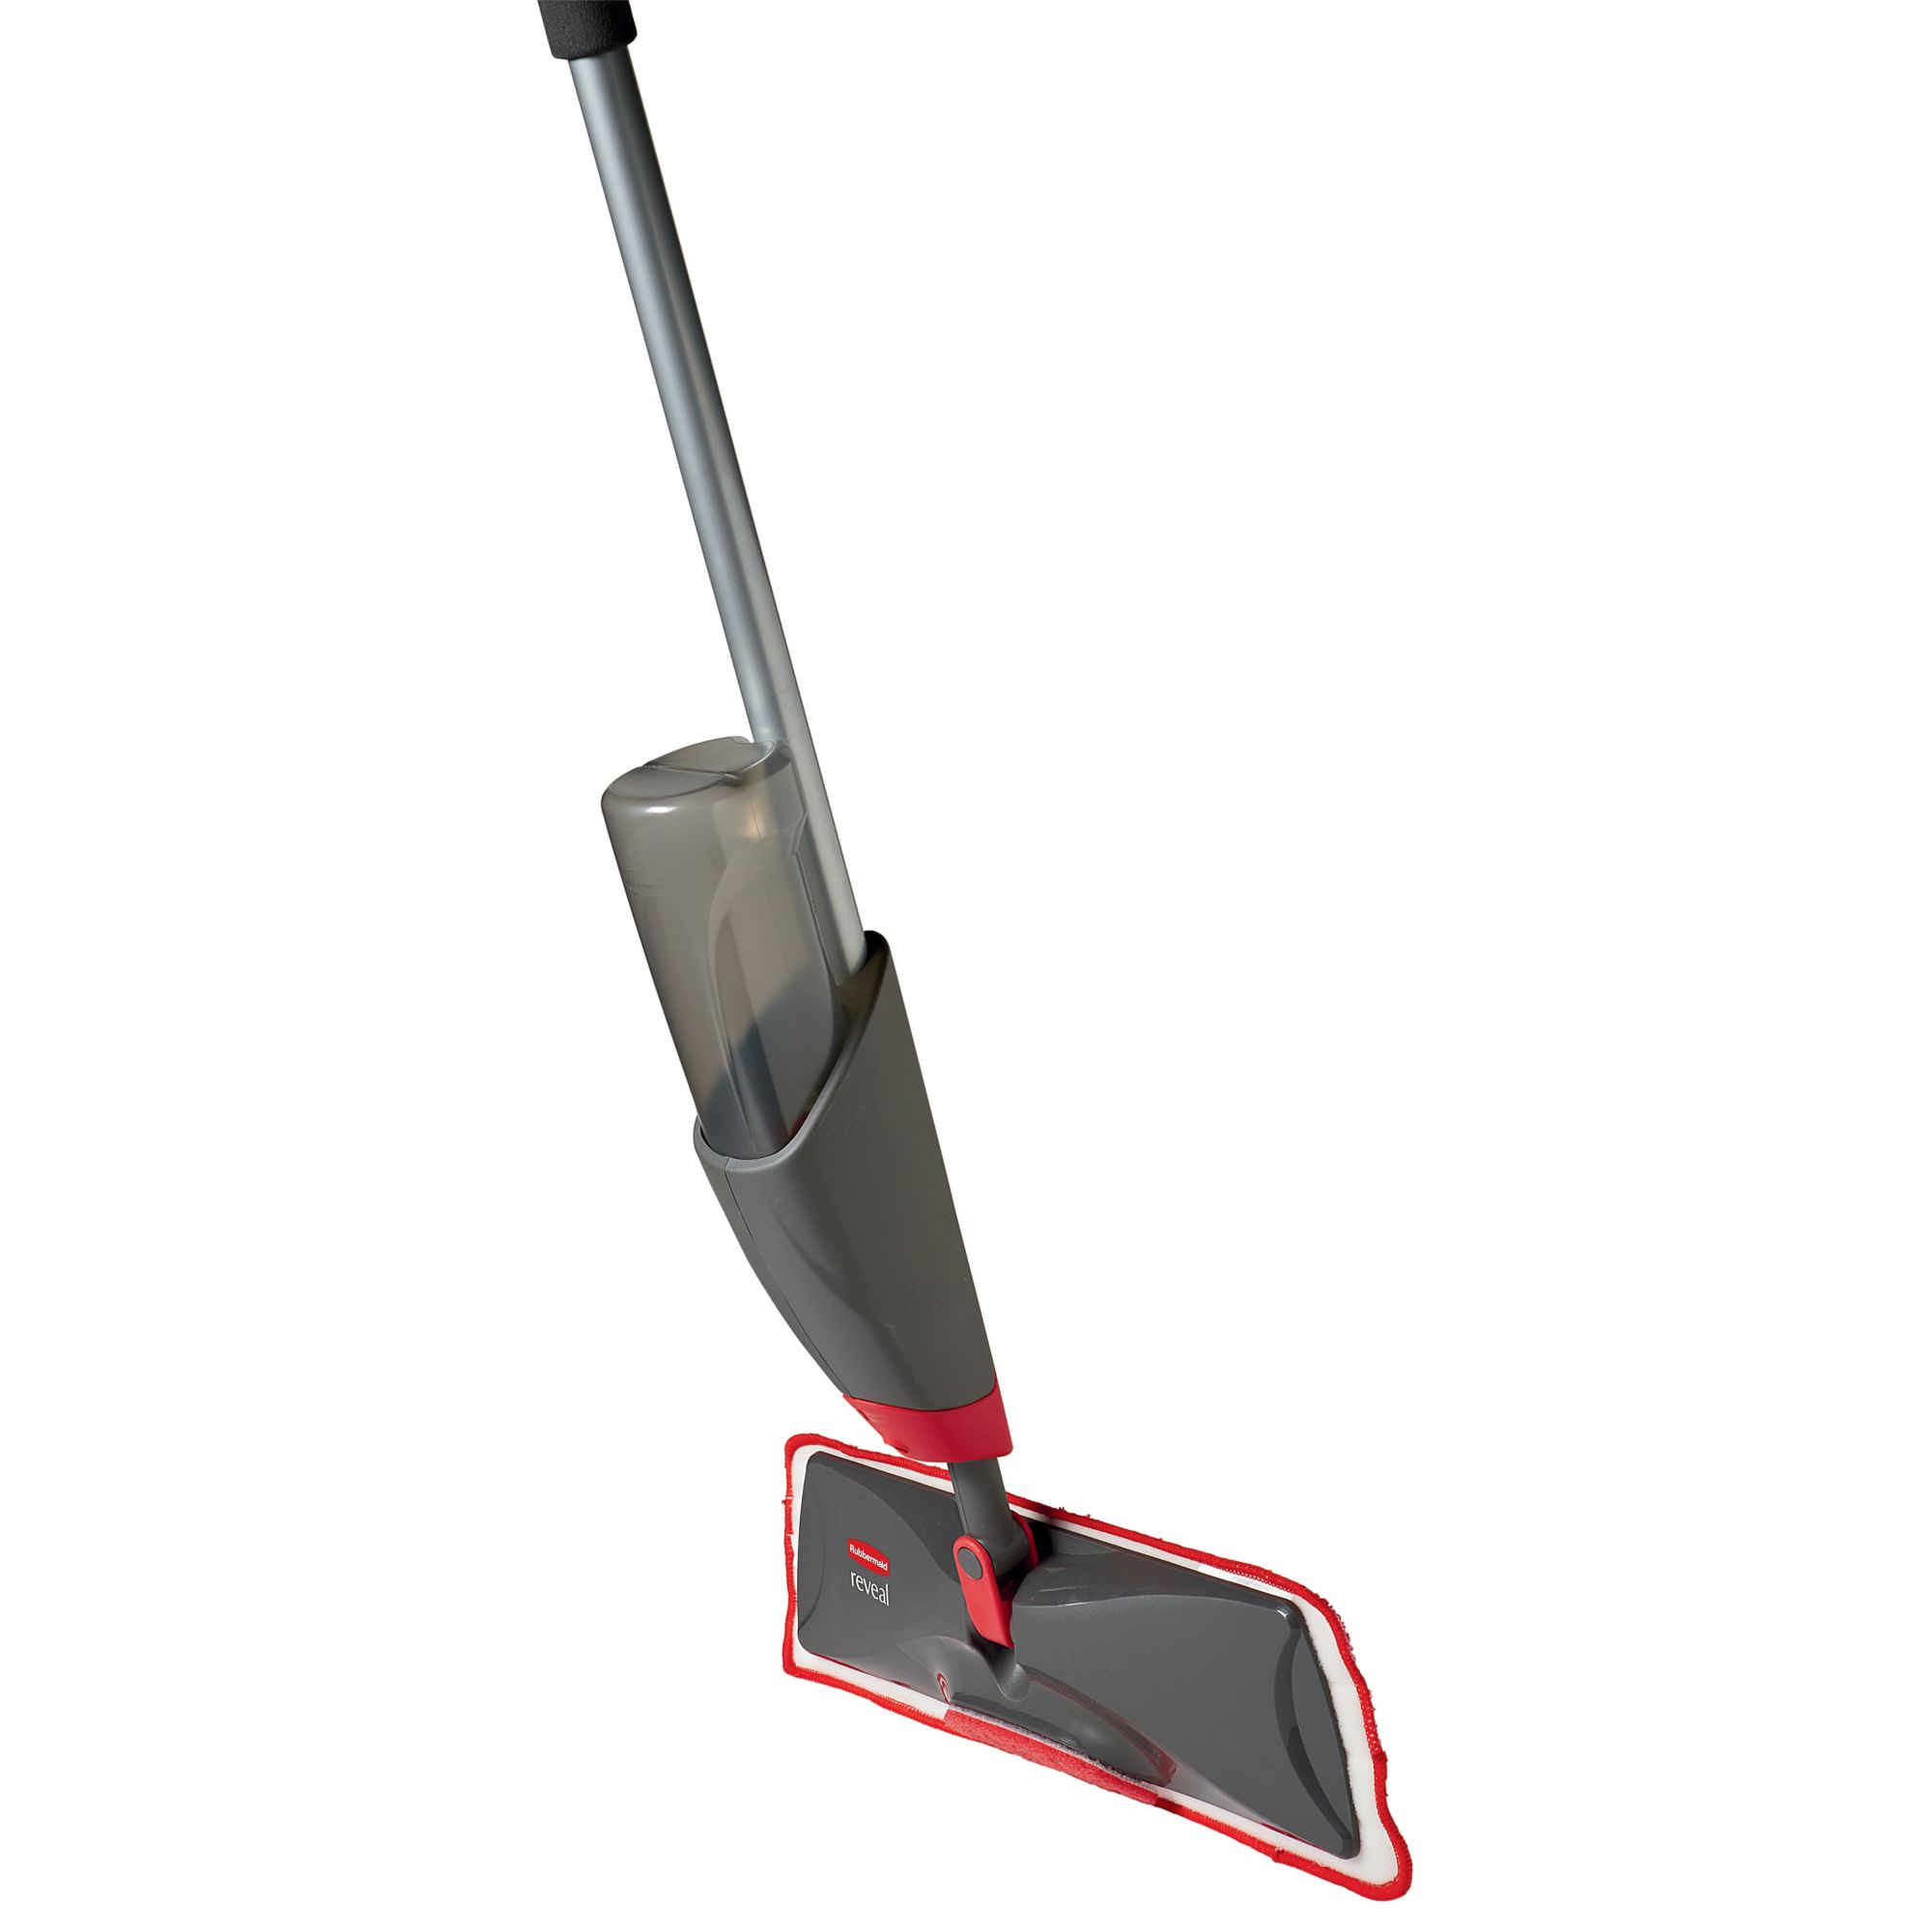 Rubbermaid Reveal Spray Mop - Today's Homeowner